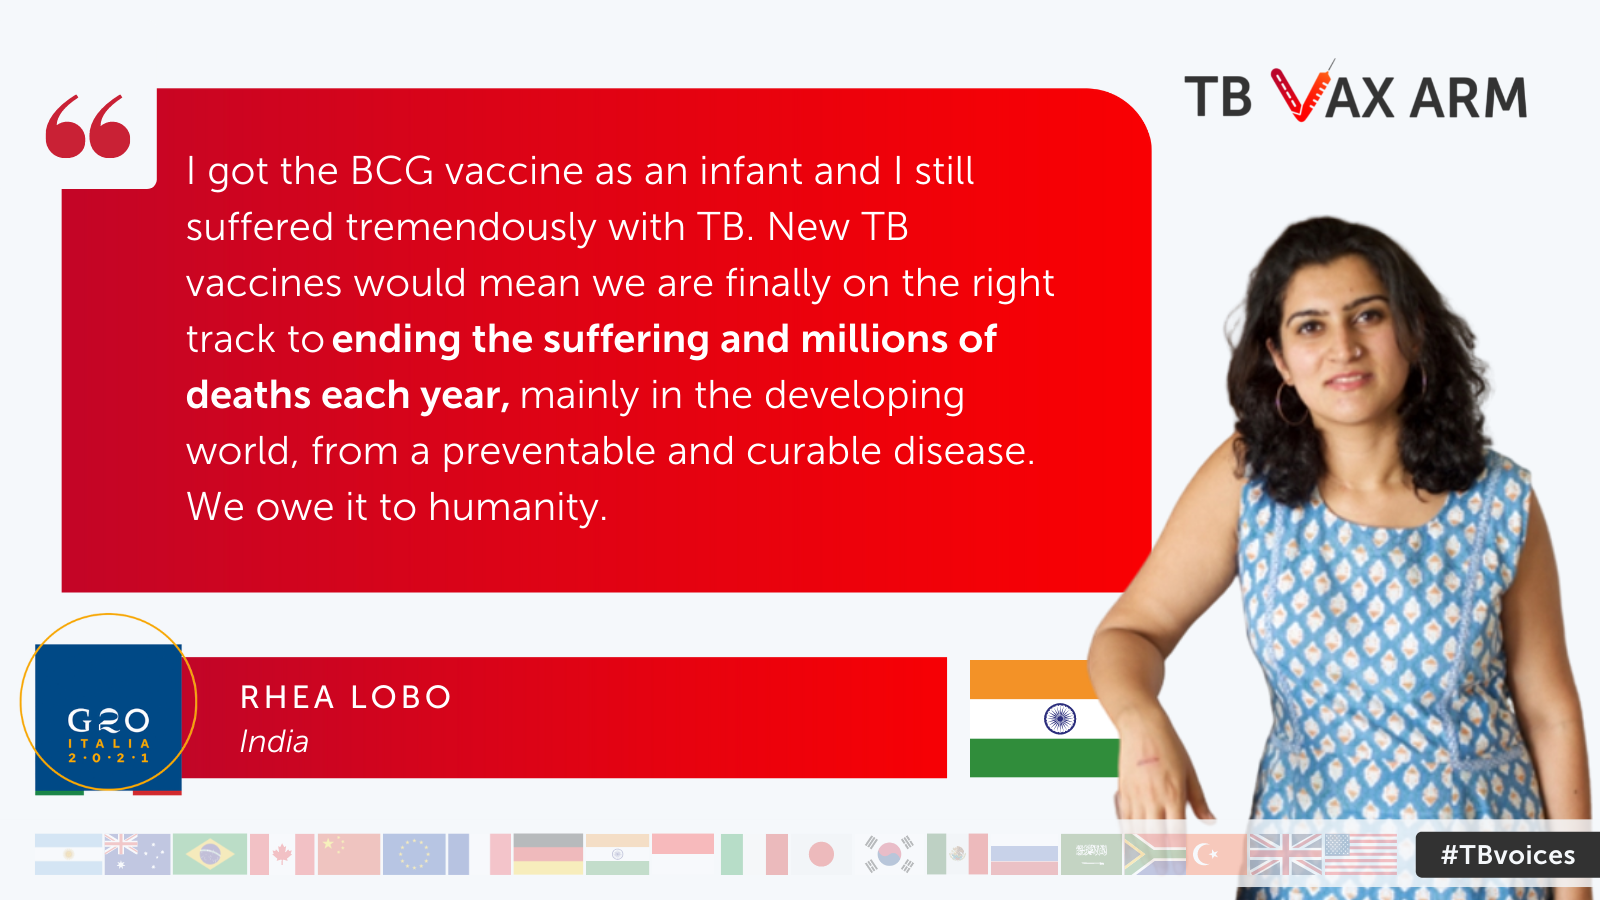 Rhea Lobo, India – “I got the BCG vaccine as an infant and I still suffered tremendously with TB. New TB vaccines would mean we are finally on the right track to ending the suffering and millions of deaths each year, mainly in the developing world, from a preventable and curable disease. We owe it to humanity.